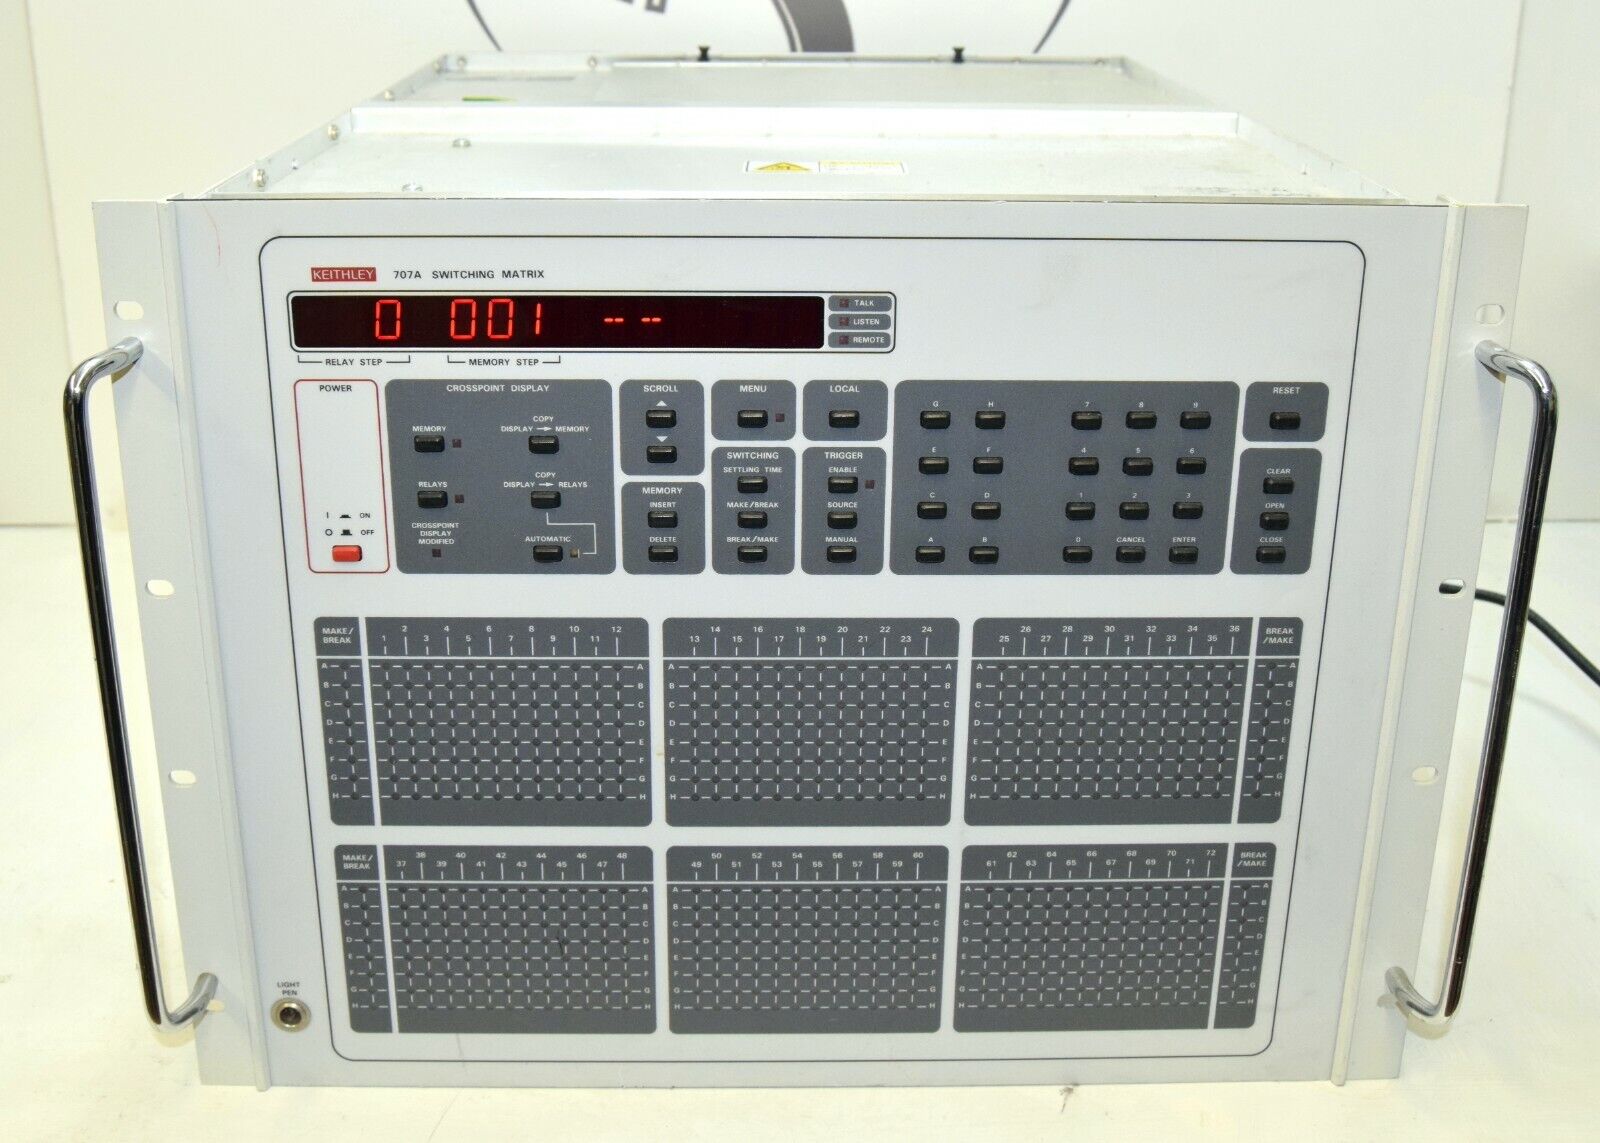 Keithley 707A Switching Matrix Mainframe